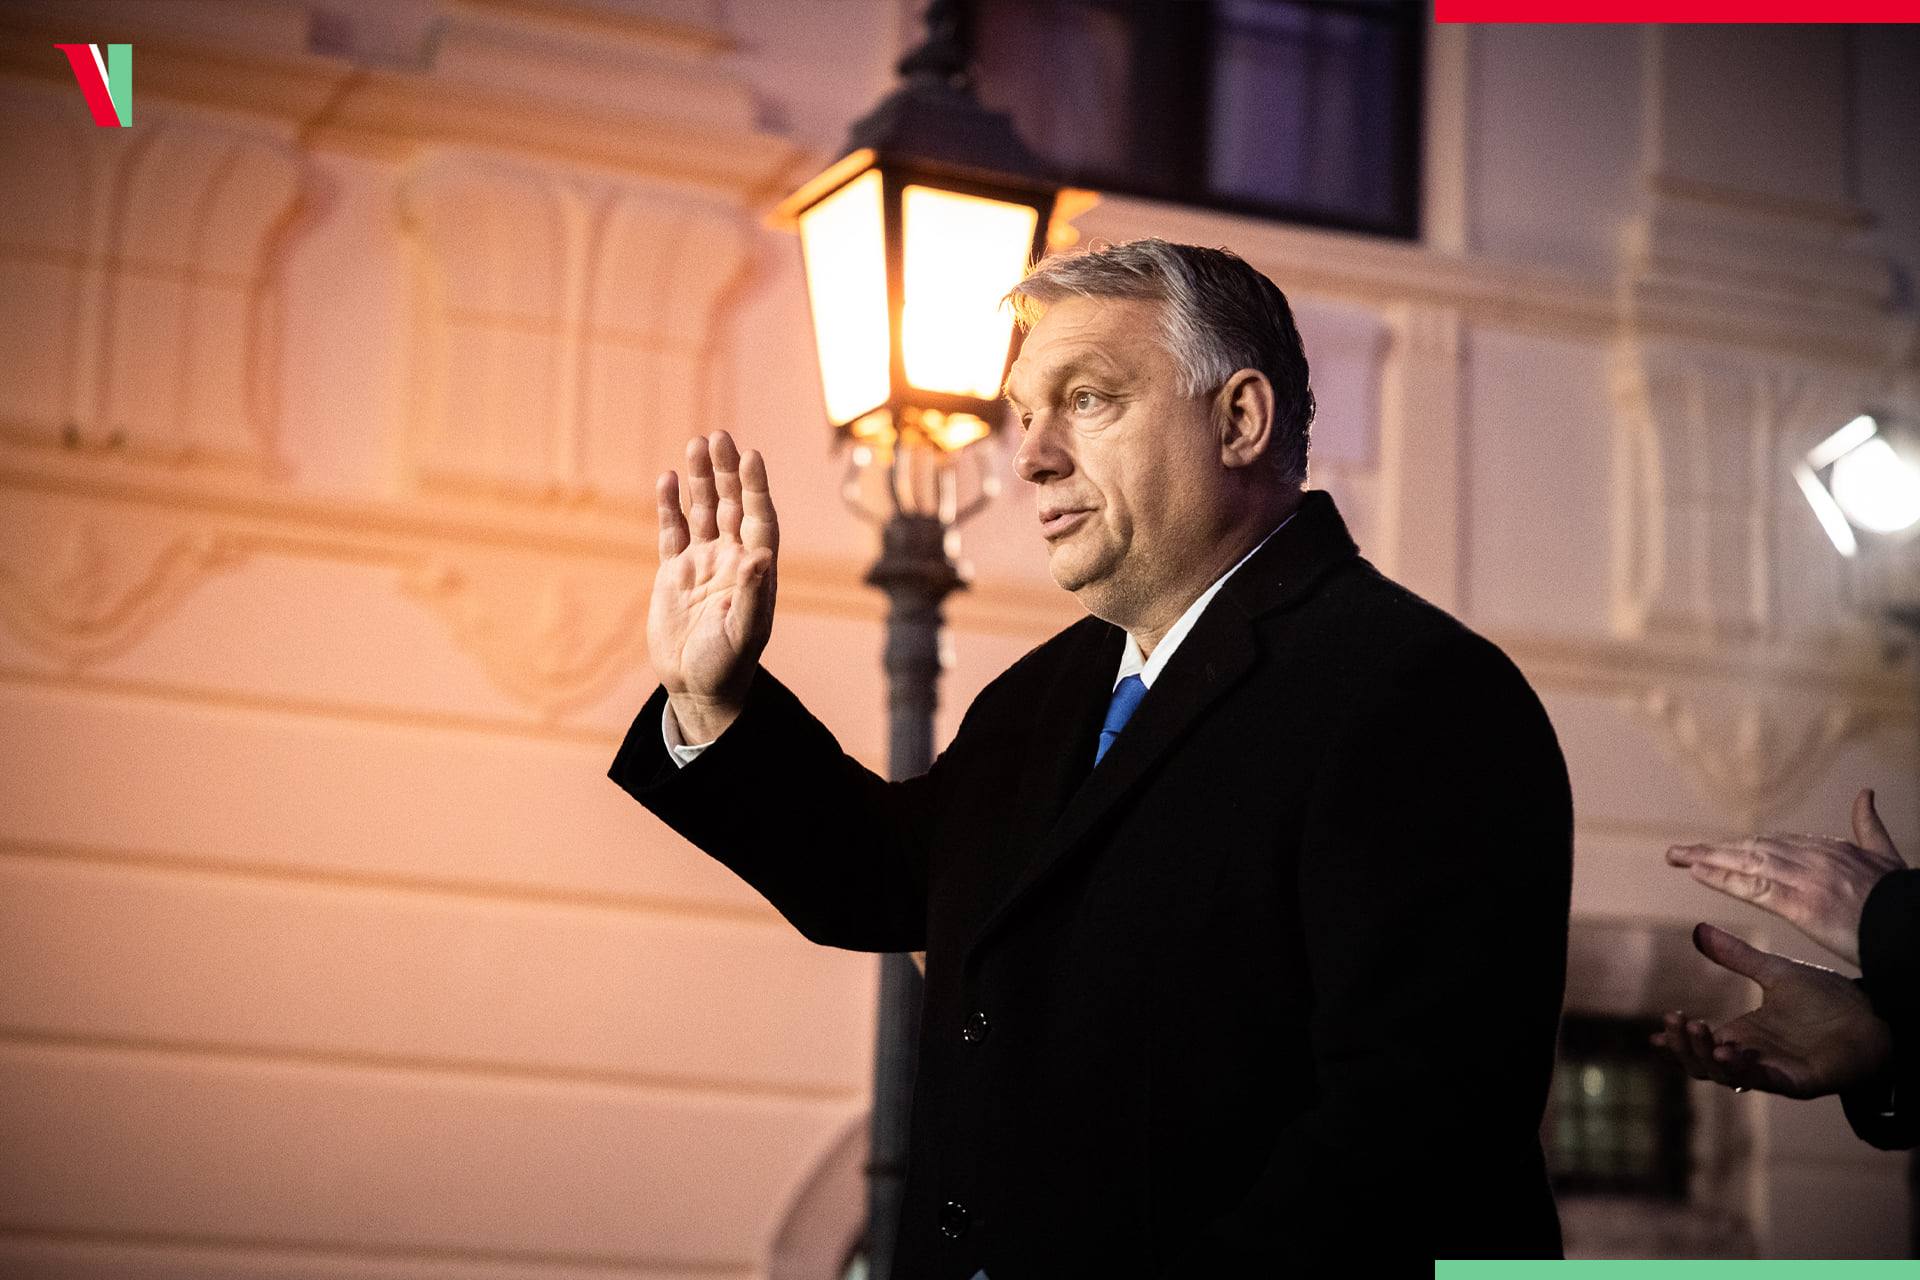 Swiss Embassy to Orbán: "Holes are not caused by vaccination"